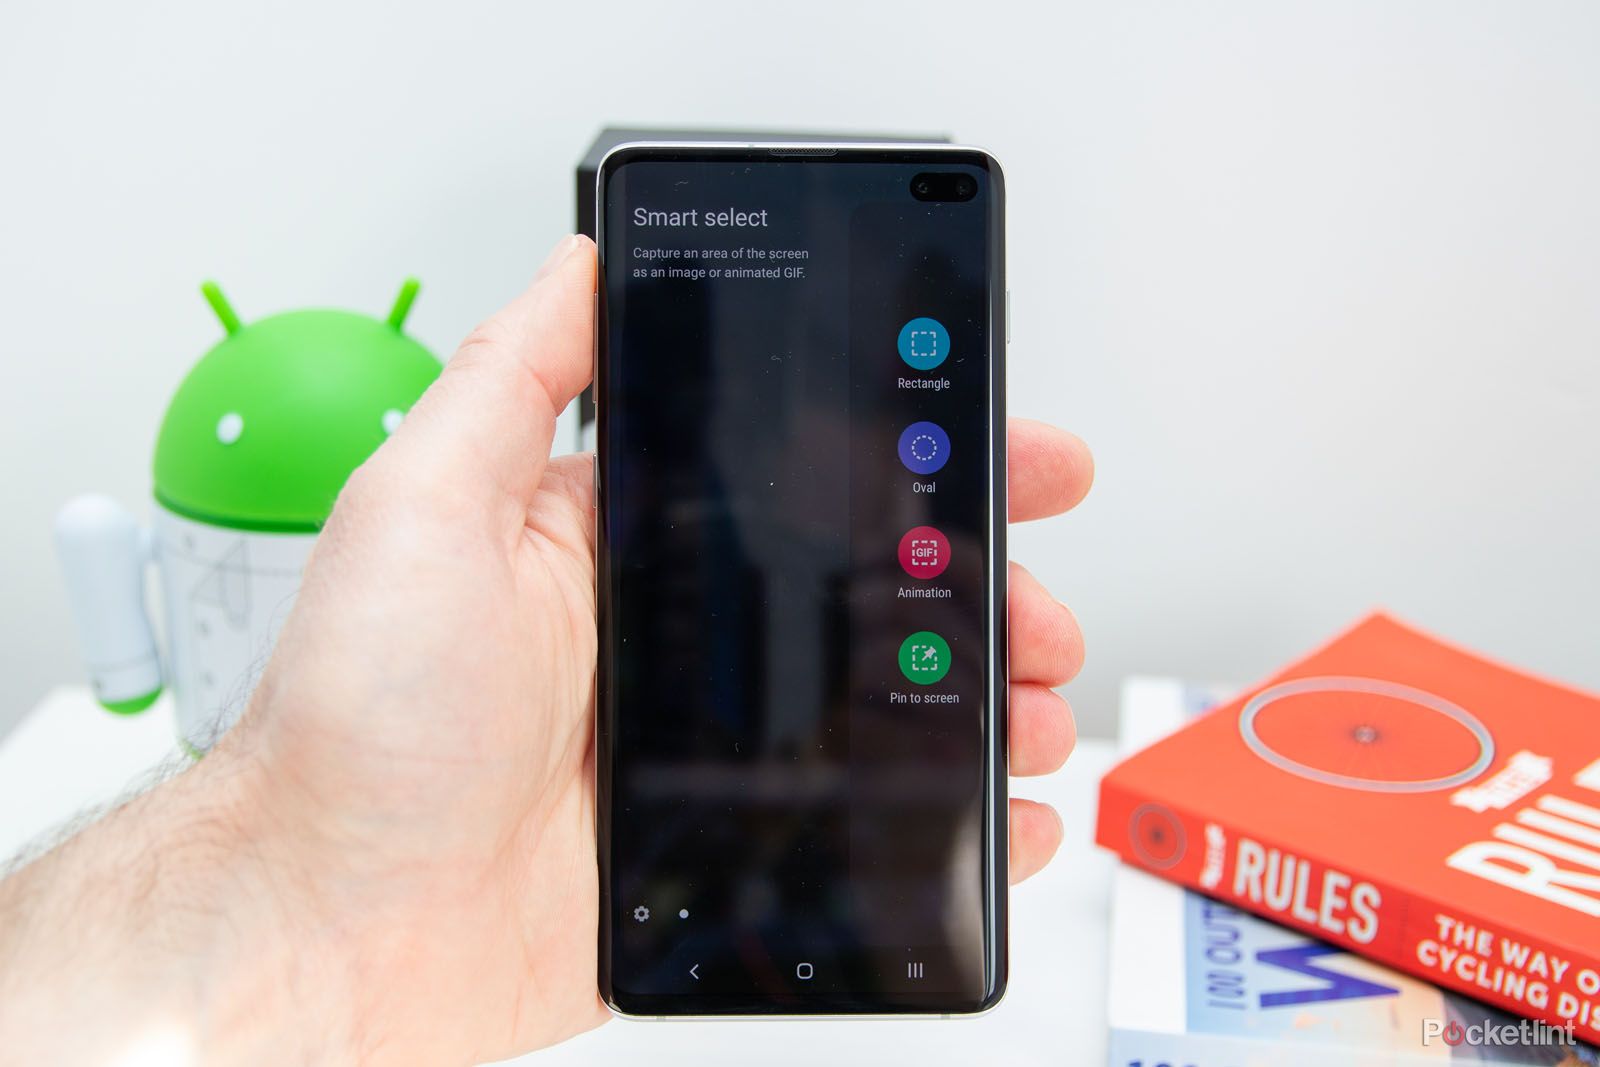 Samsung Galaxy S10 Tips And Tricks image 7